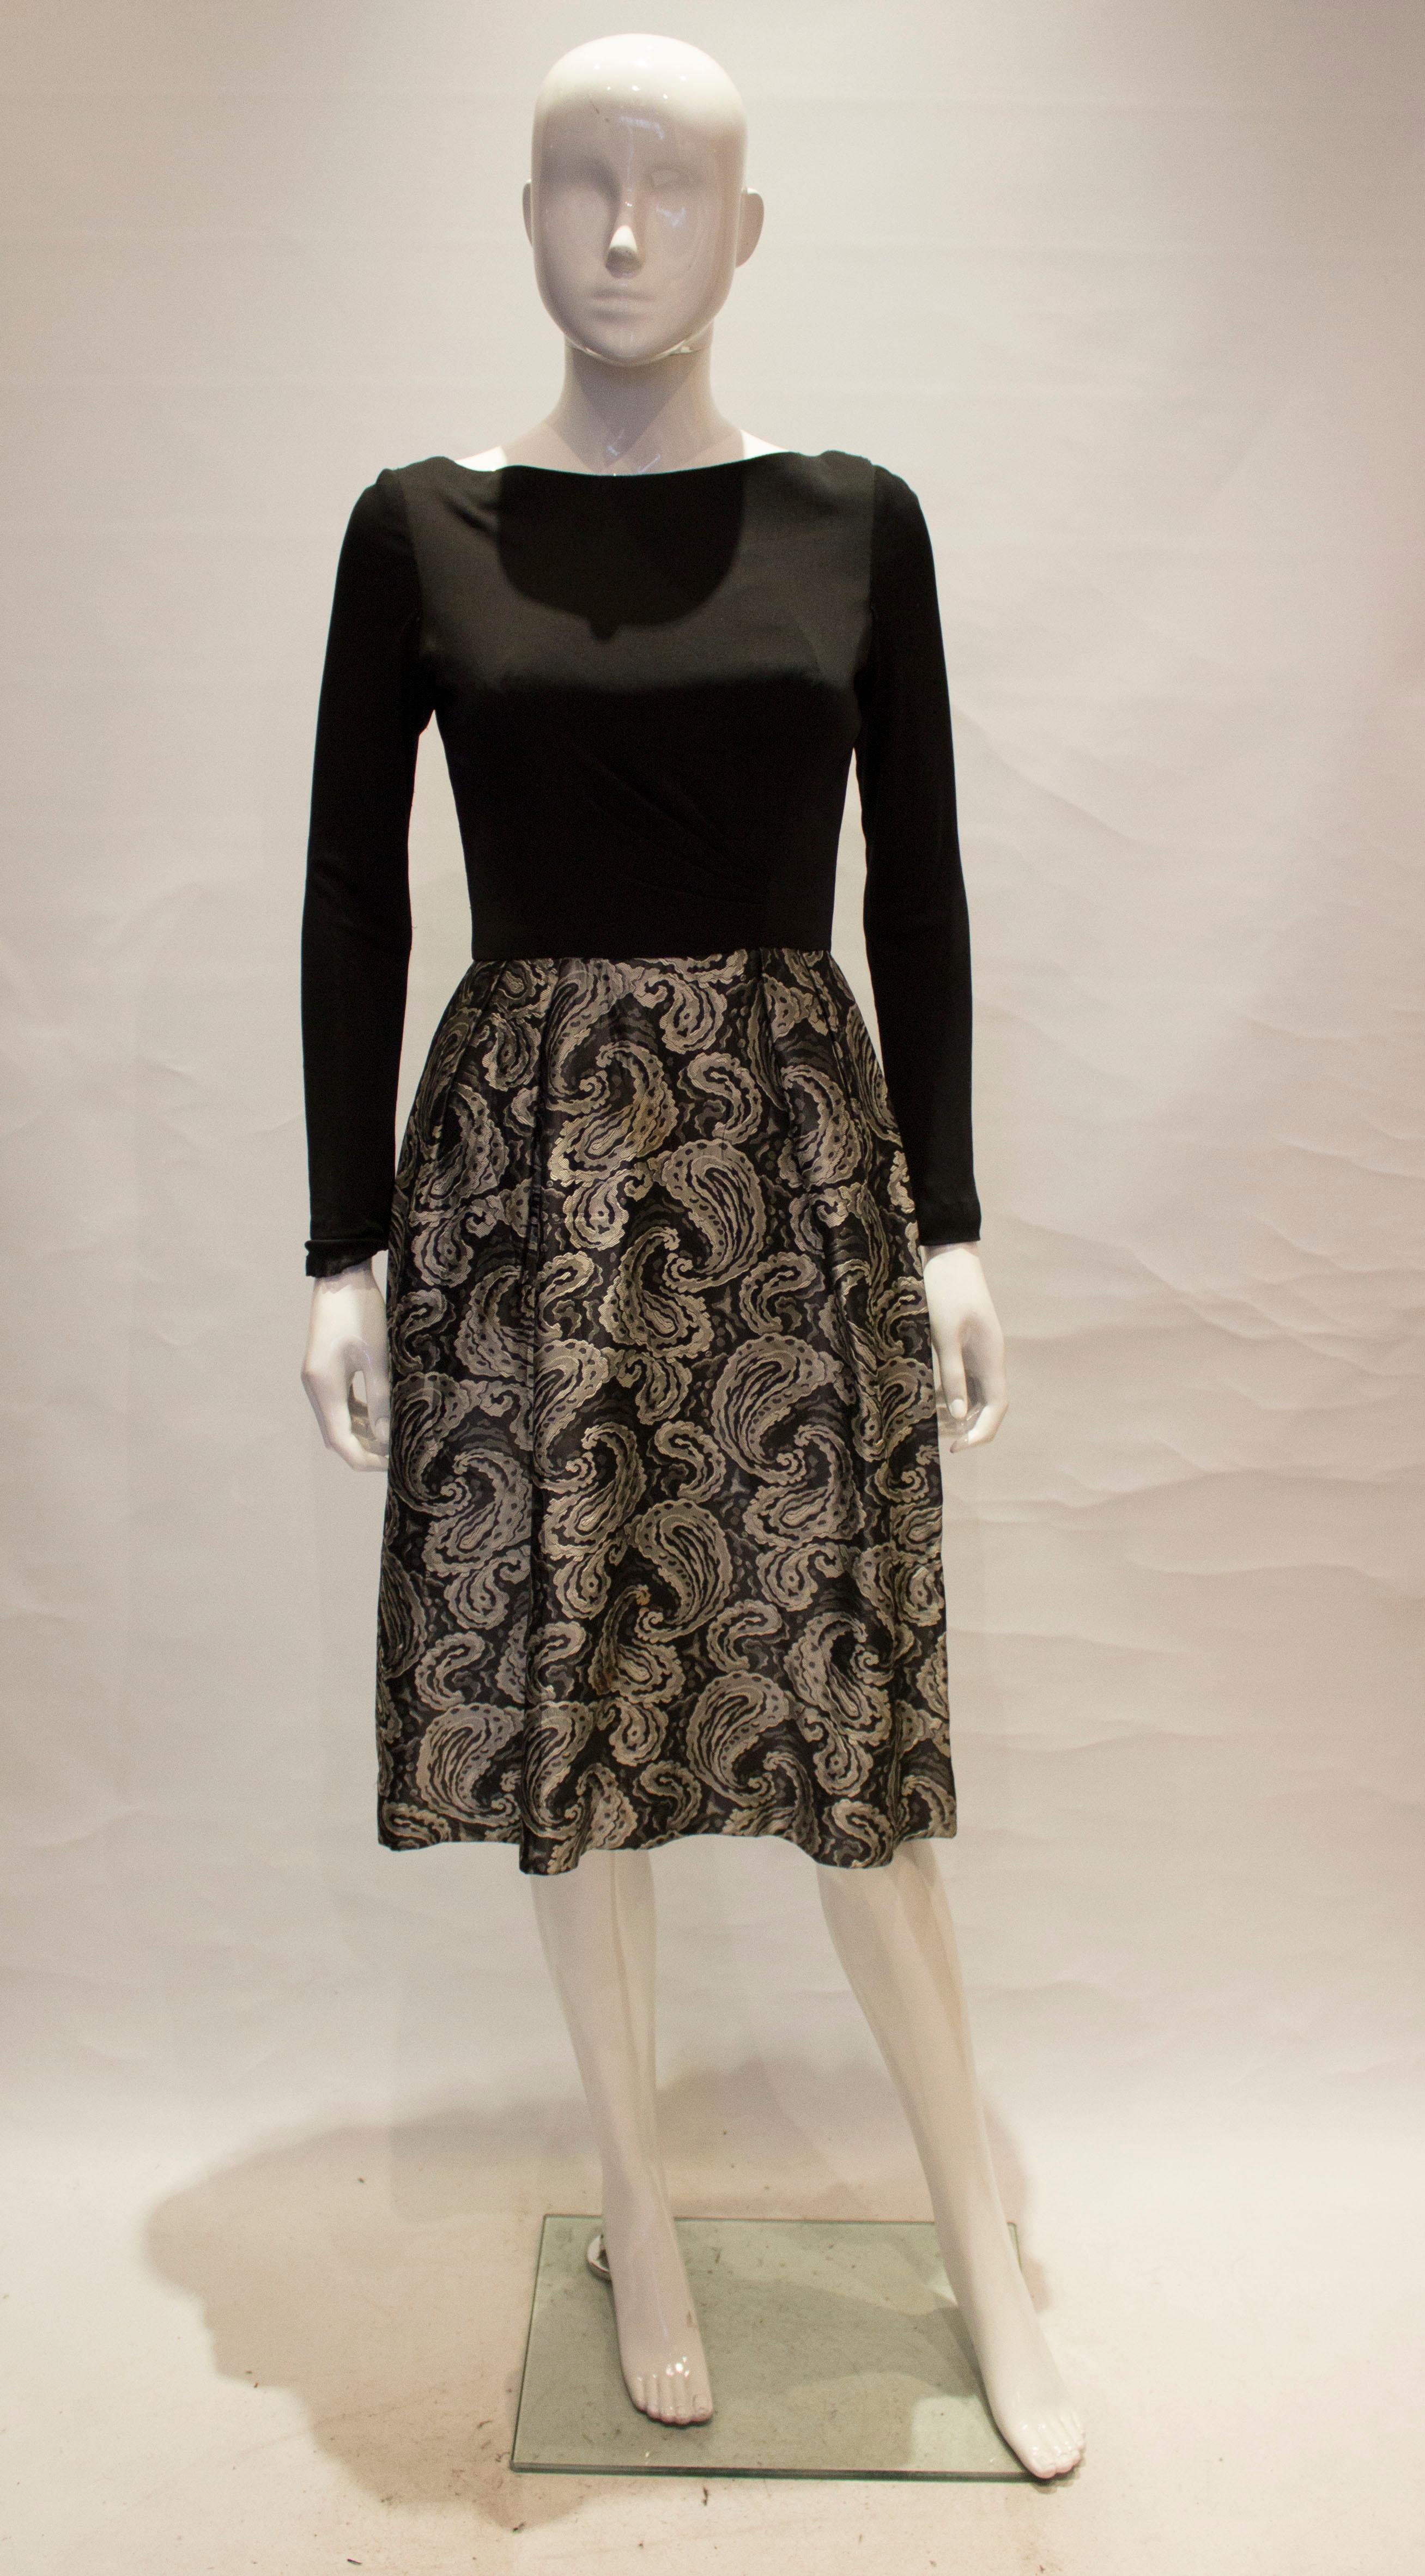 A lovely 1950s brocade dress with a black top and silver and black paisley printed skirt, it has a lovely low back and zips at the back 

measurements taken flat in inches are

bust - 16inches
waist - 13inches 
length - 42inches